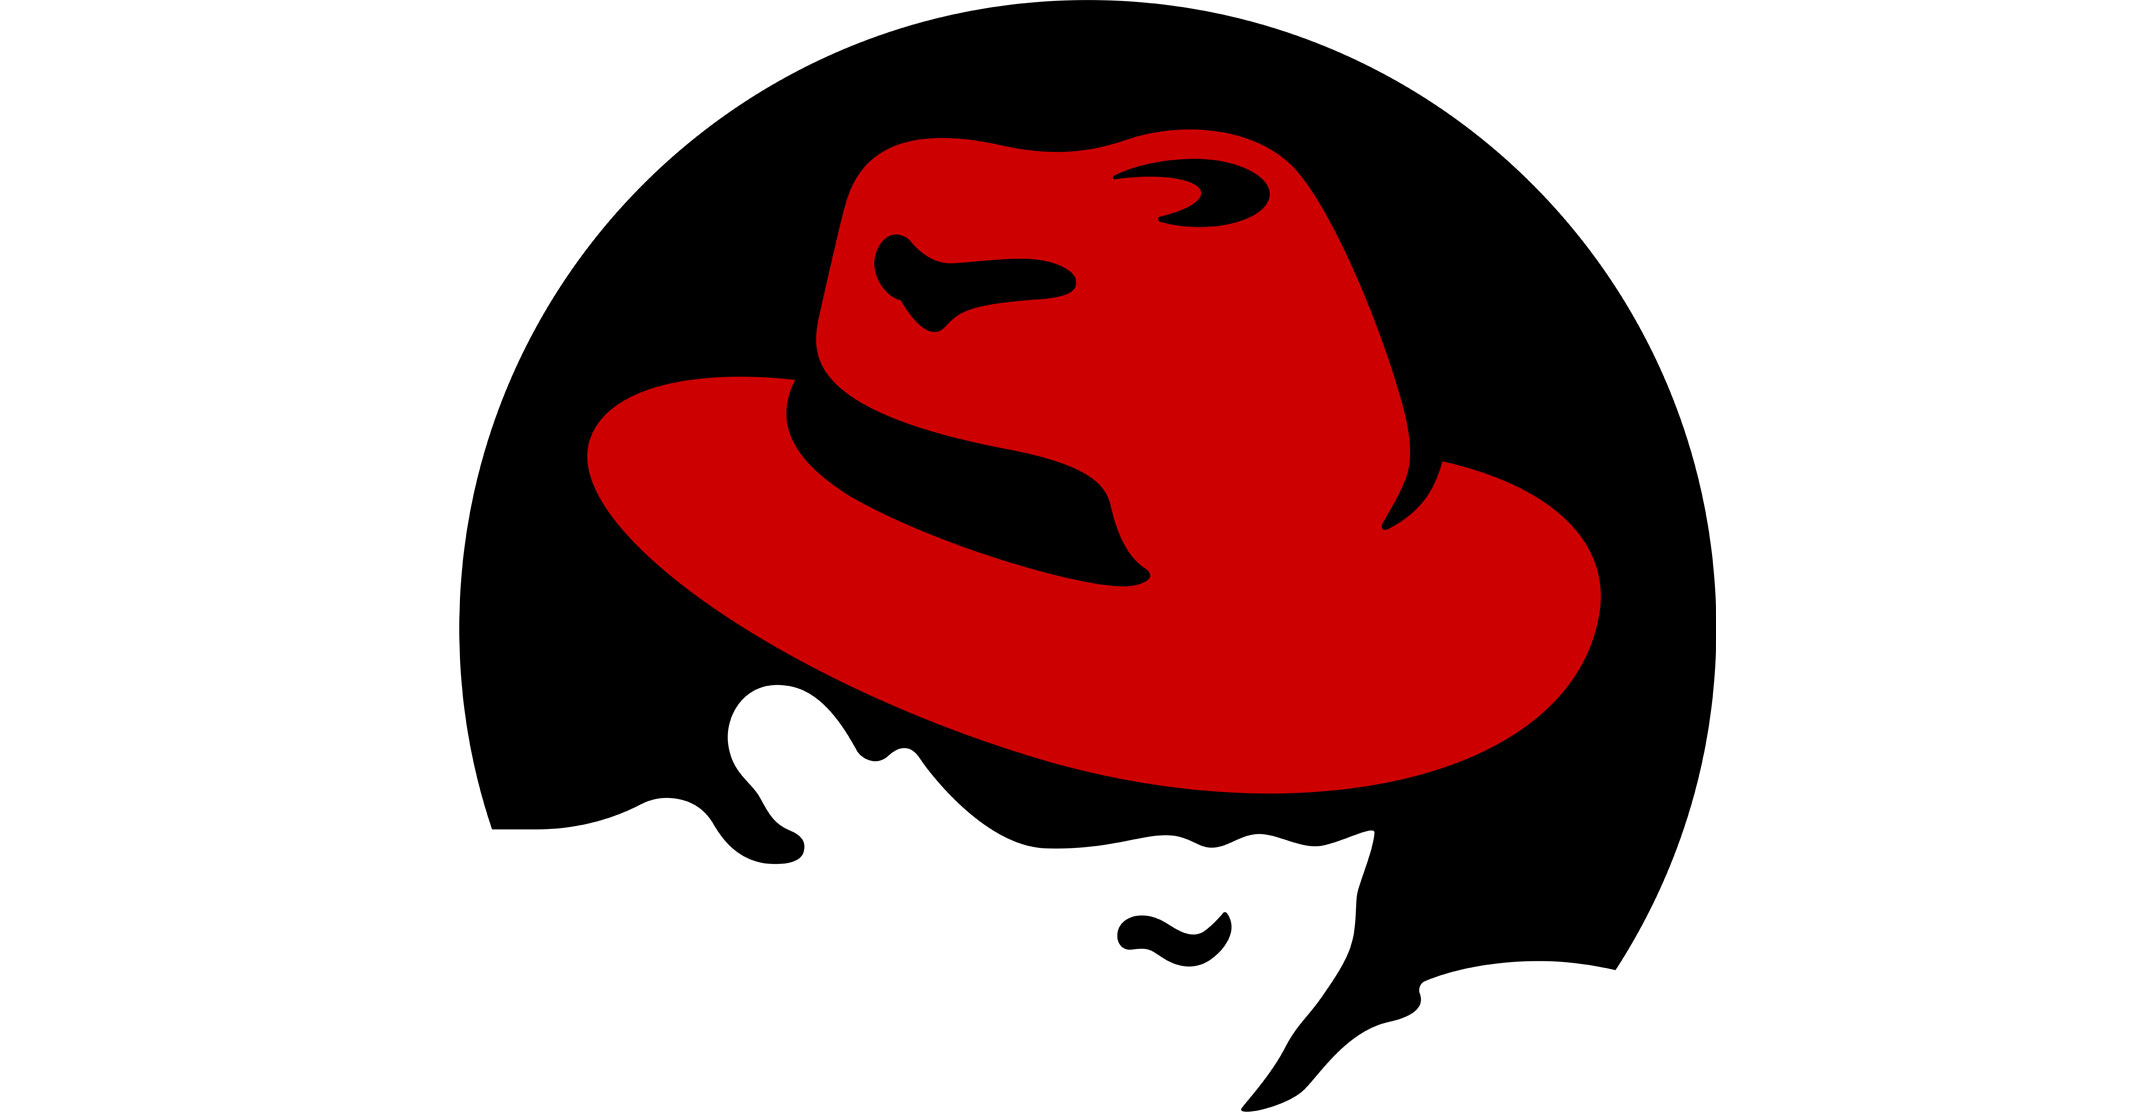 Red hat 7. Red hat. Шляпа Red hat. Значок Red hat. Red hat Enterprise Linux.